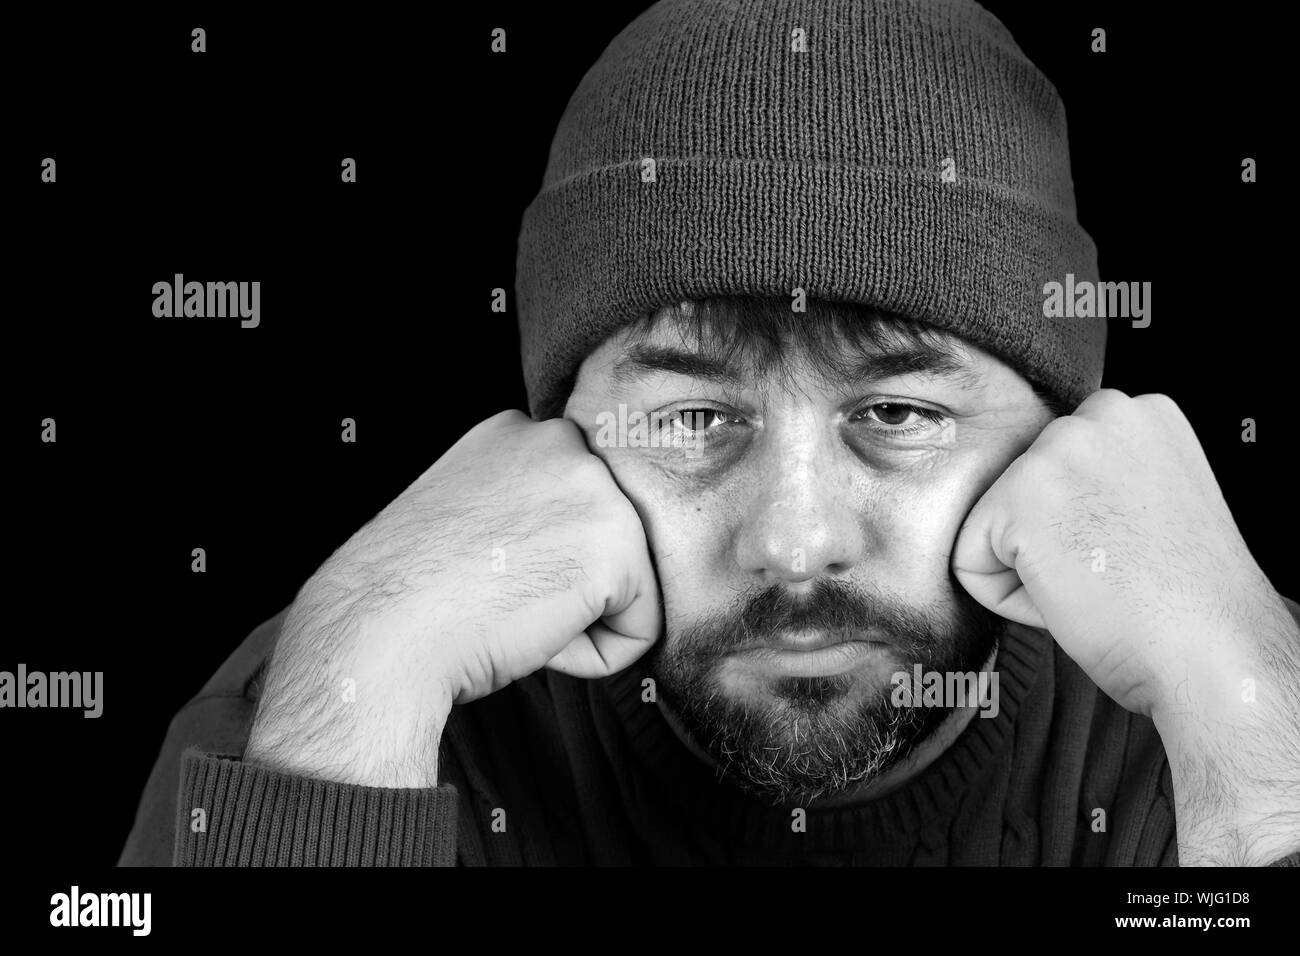 Dramatic black and white portrait of a man in despair Stock Photo